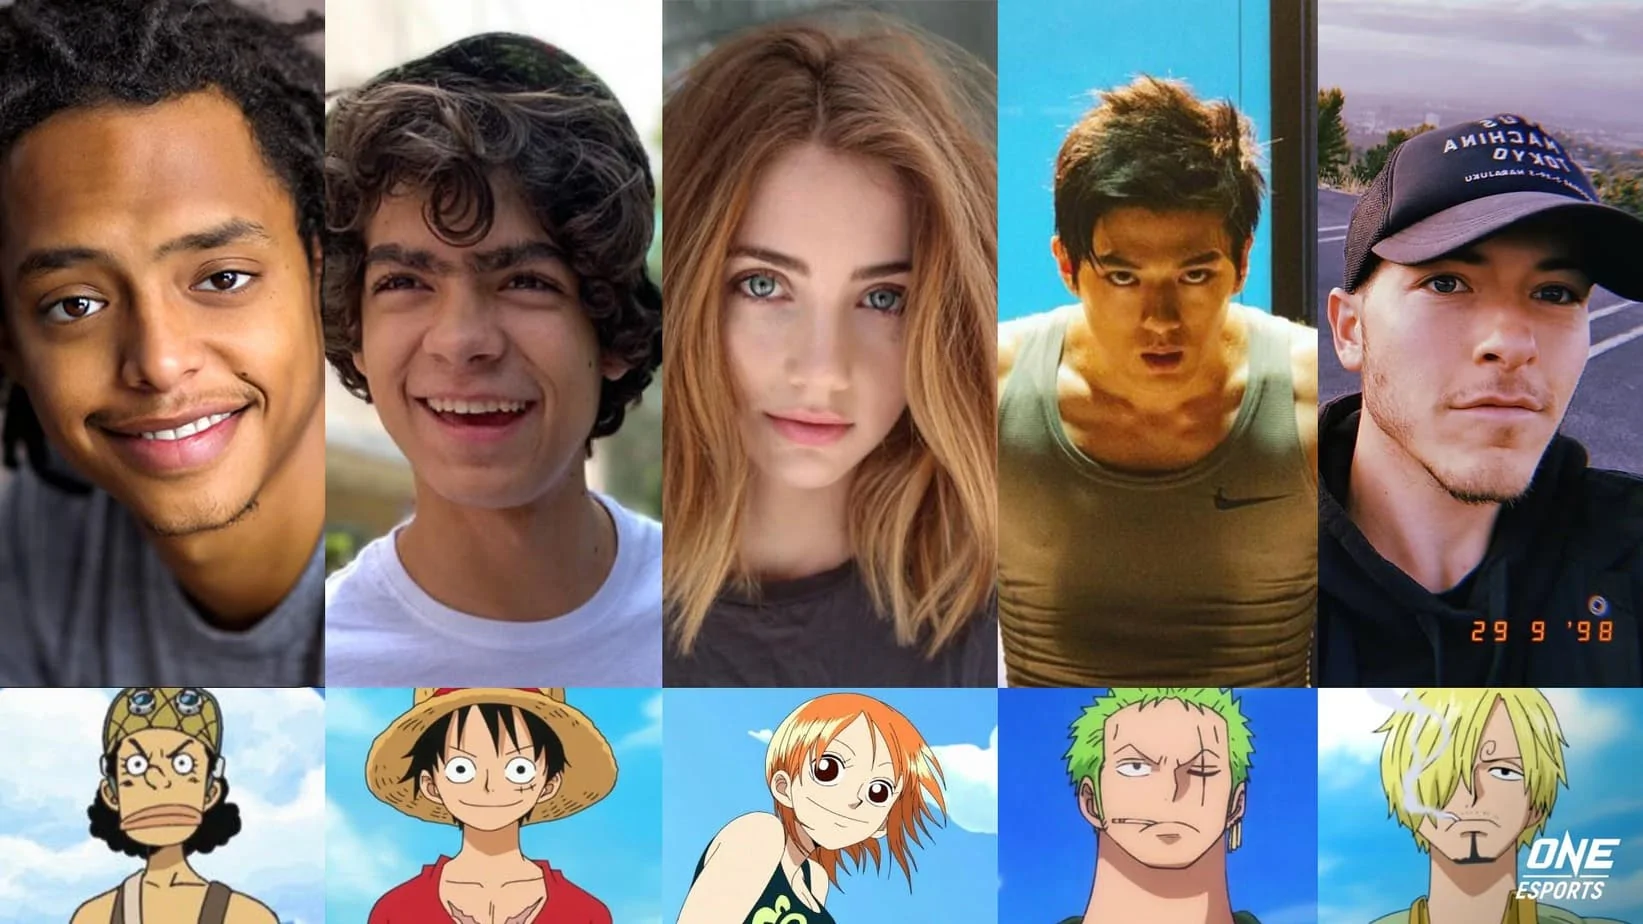 One Piece Live-Action on Netflix: Release Date, Cast, and More